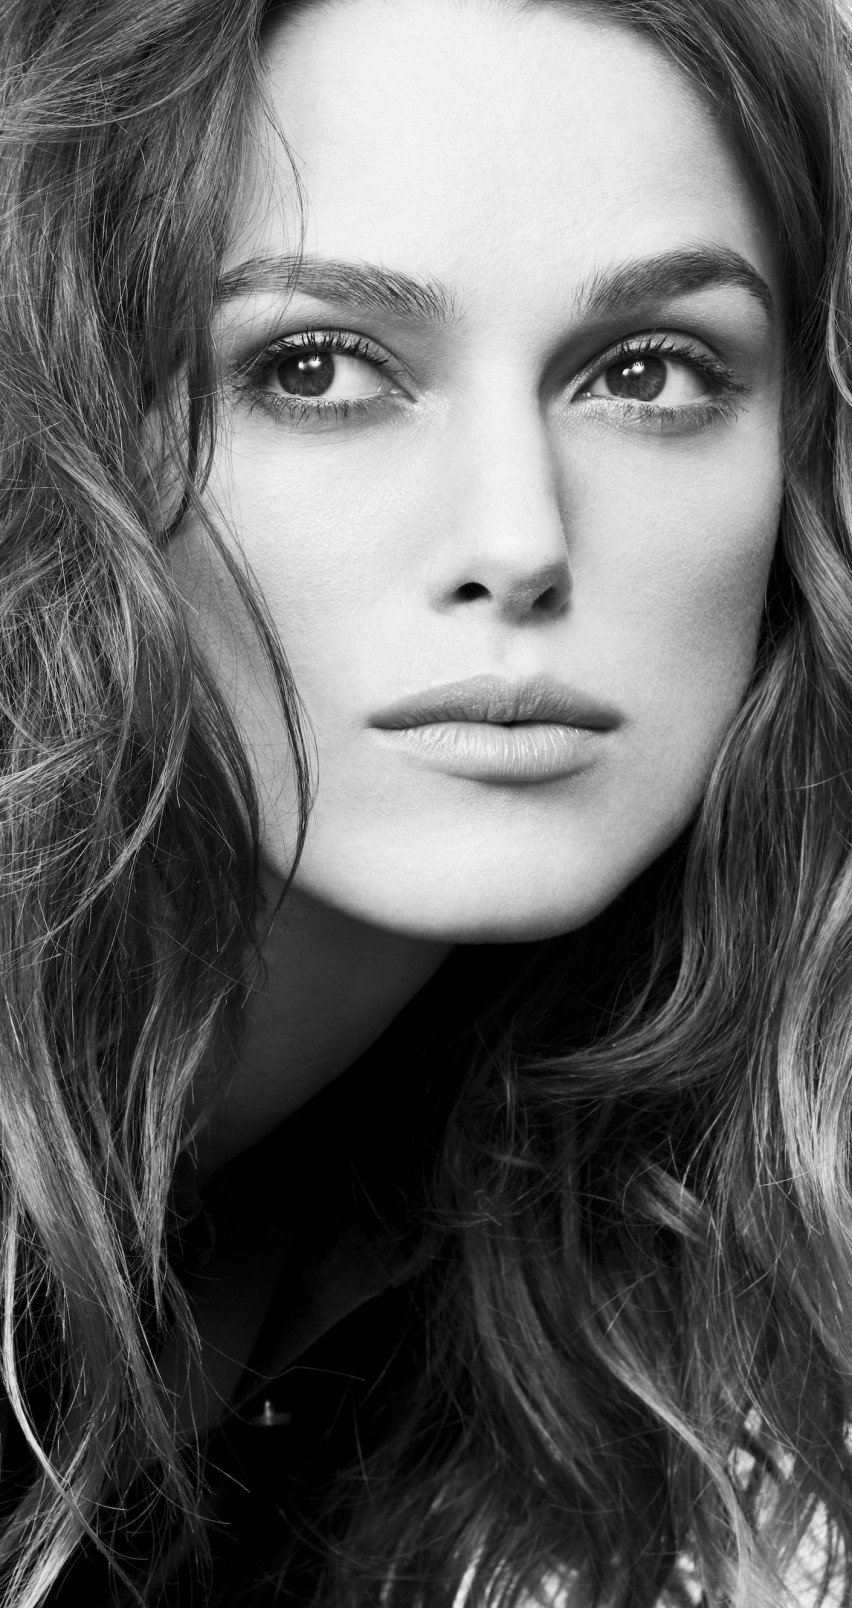 Keira Knightley in Black & White Wallpaper for Apple iPhone 6 / 6s